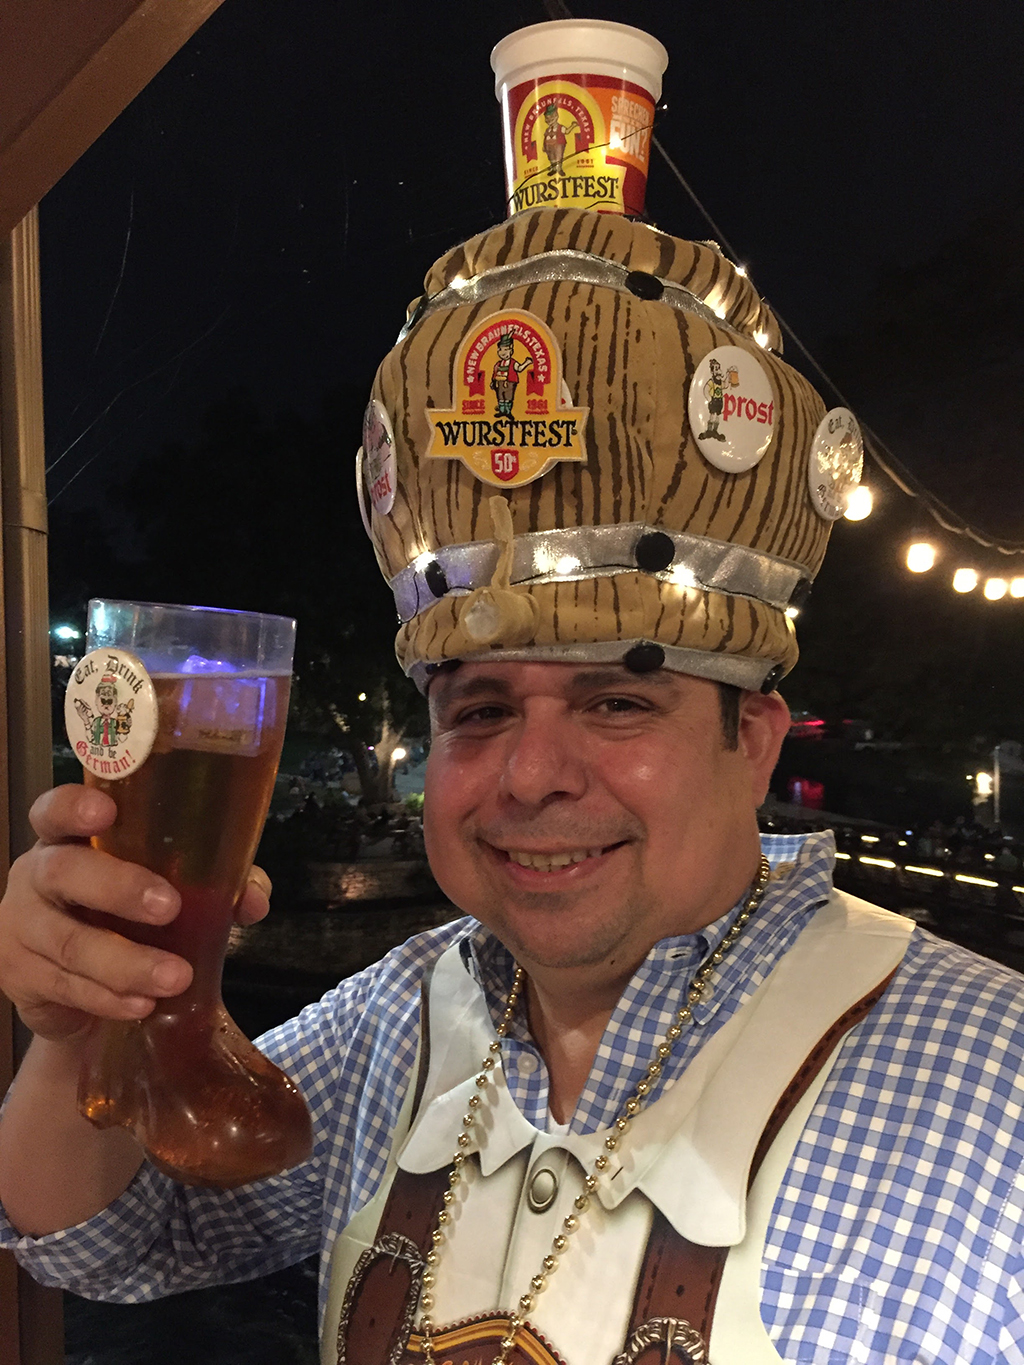 Wurstfest attendee wearing a hat, with a beer